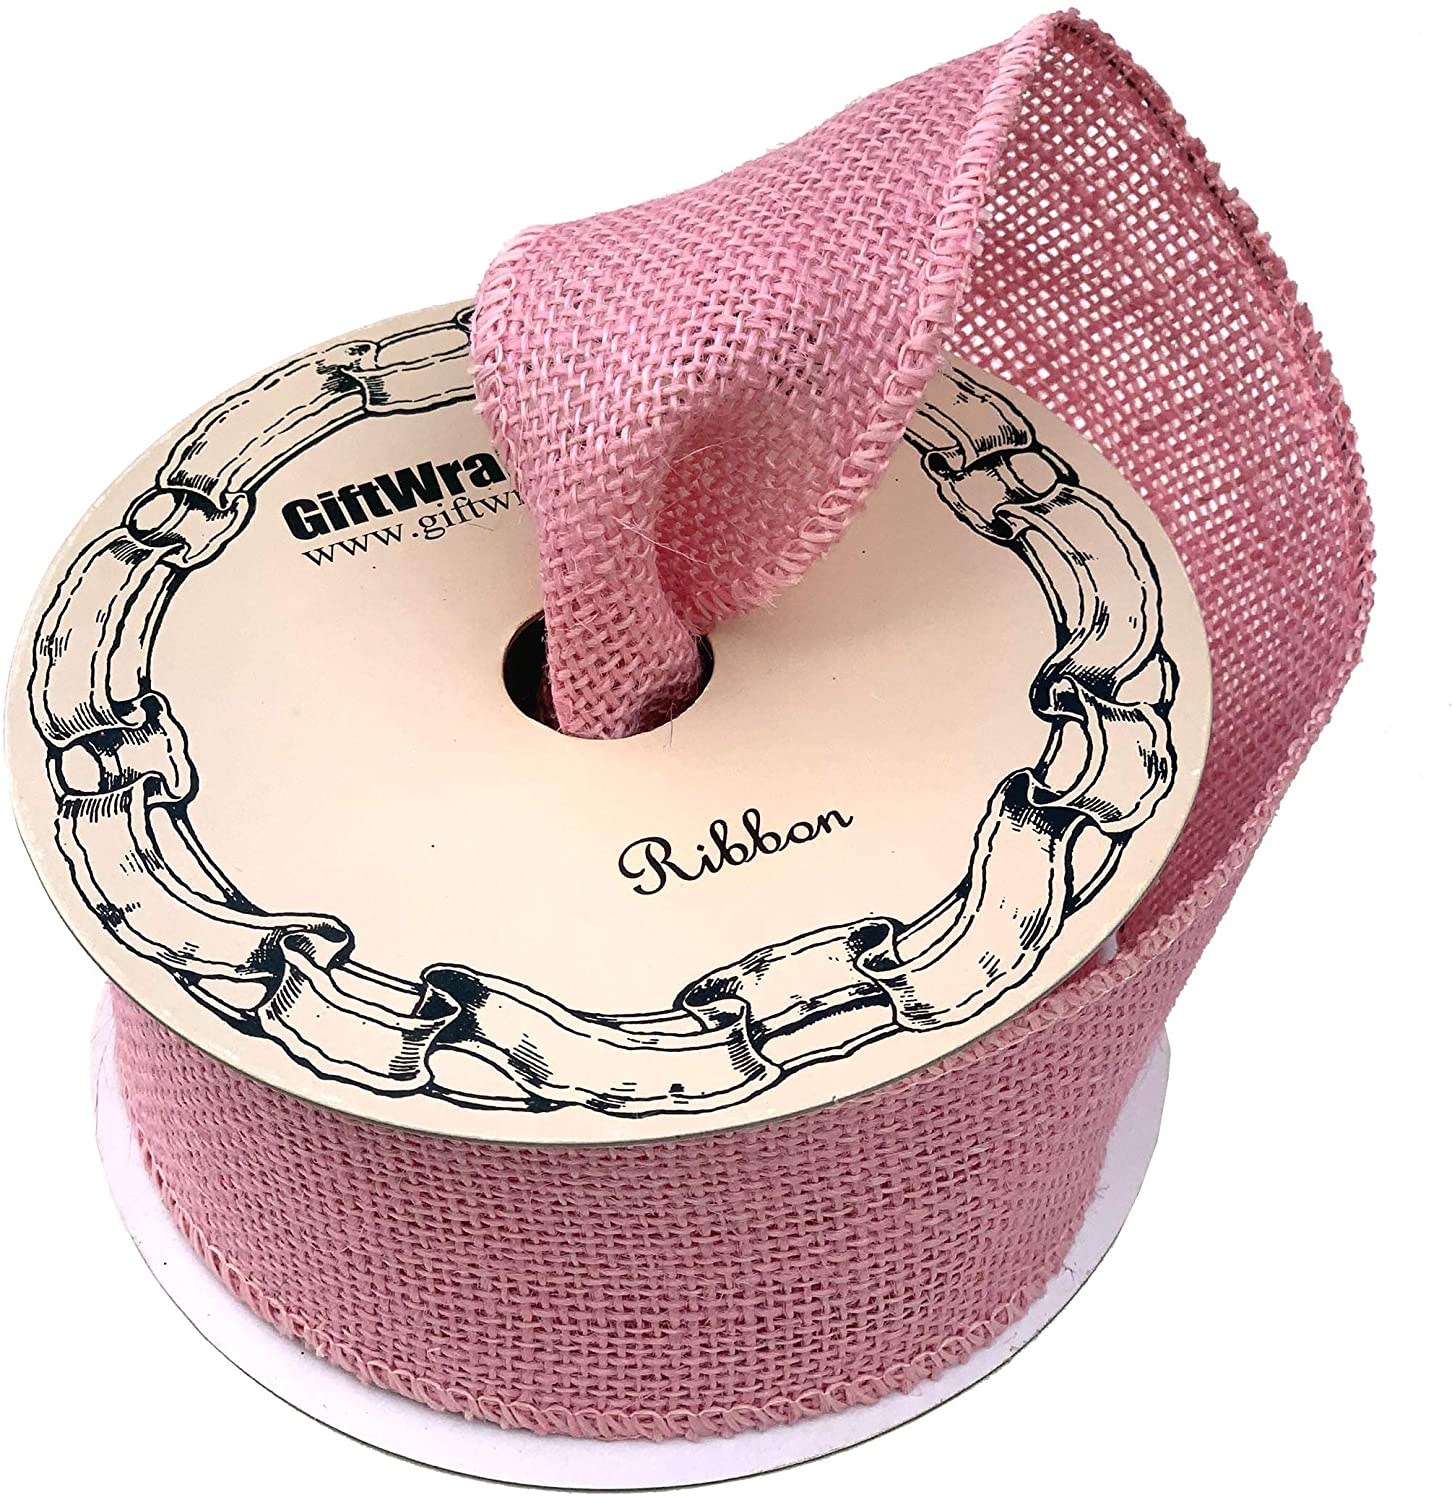 Light Pink Fabric Burlap Ribbon - 2 1/2 x 10 Yards, Wired Edge, Christmas,  Wreath, Valentine's Day, Easter, Rustic Jute Wedding Embellishments, Gift  Bow, Breast Cancer Awareness 